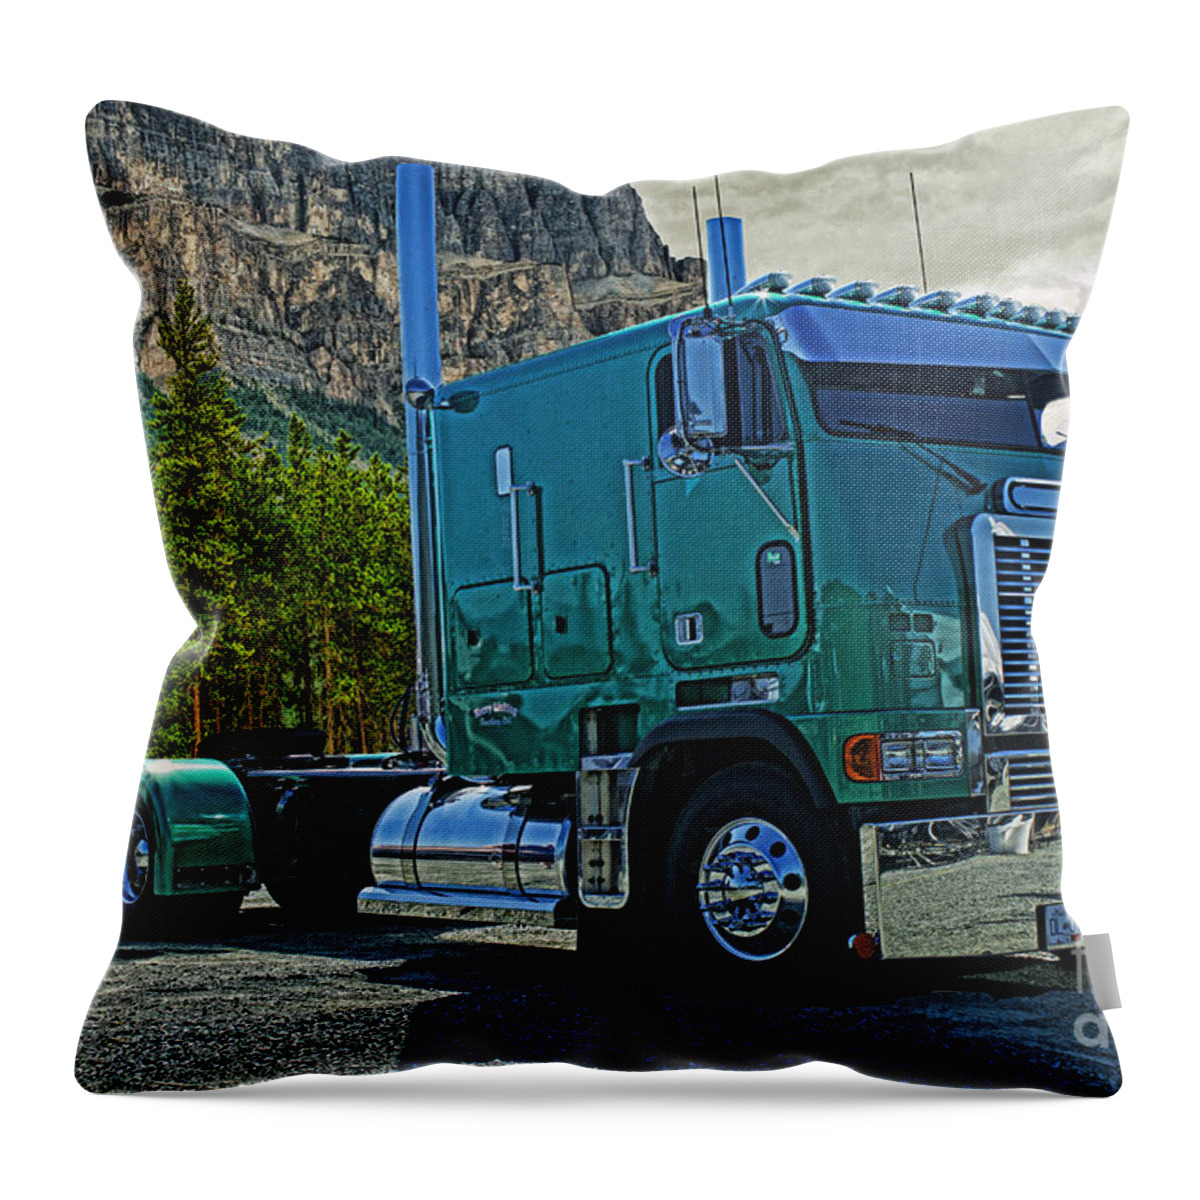 Freightliner Throw Pillow featuring the photograph Freightliner Cabover by Randy Harris